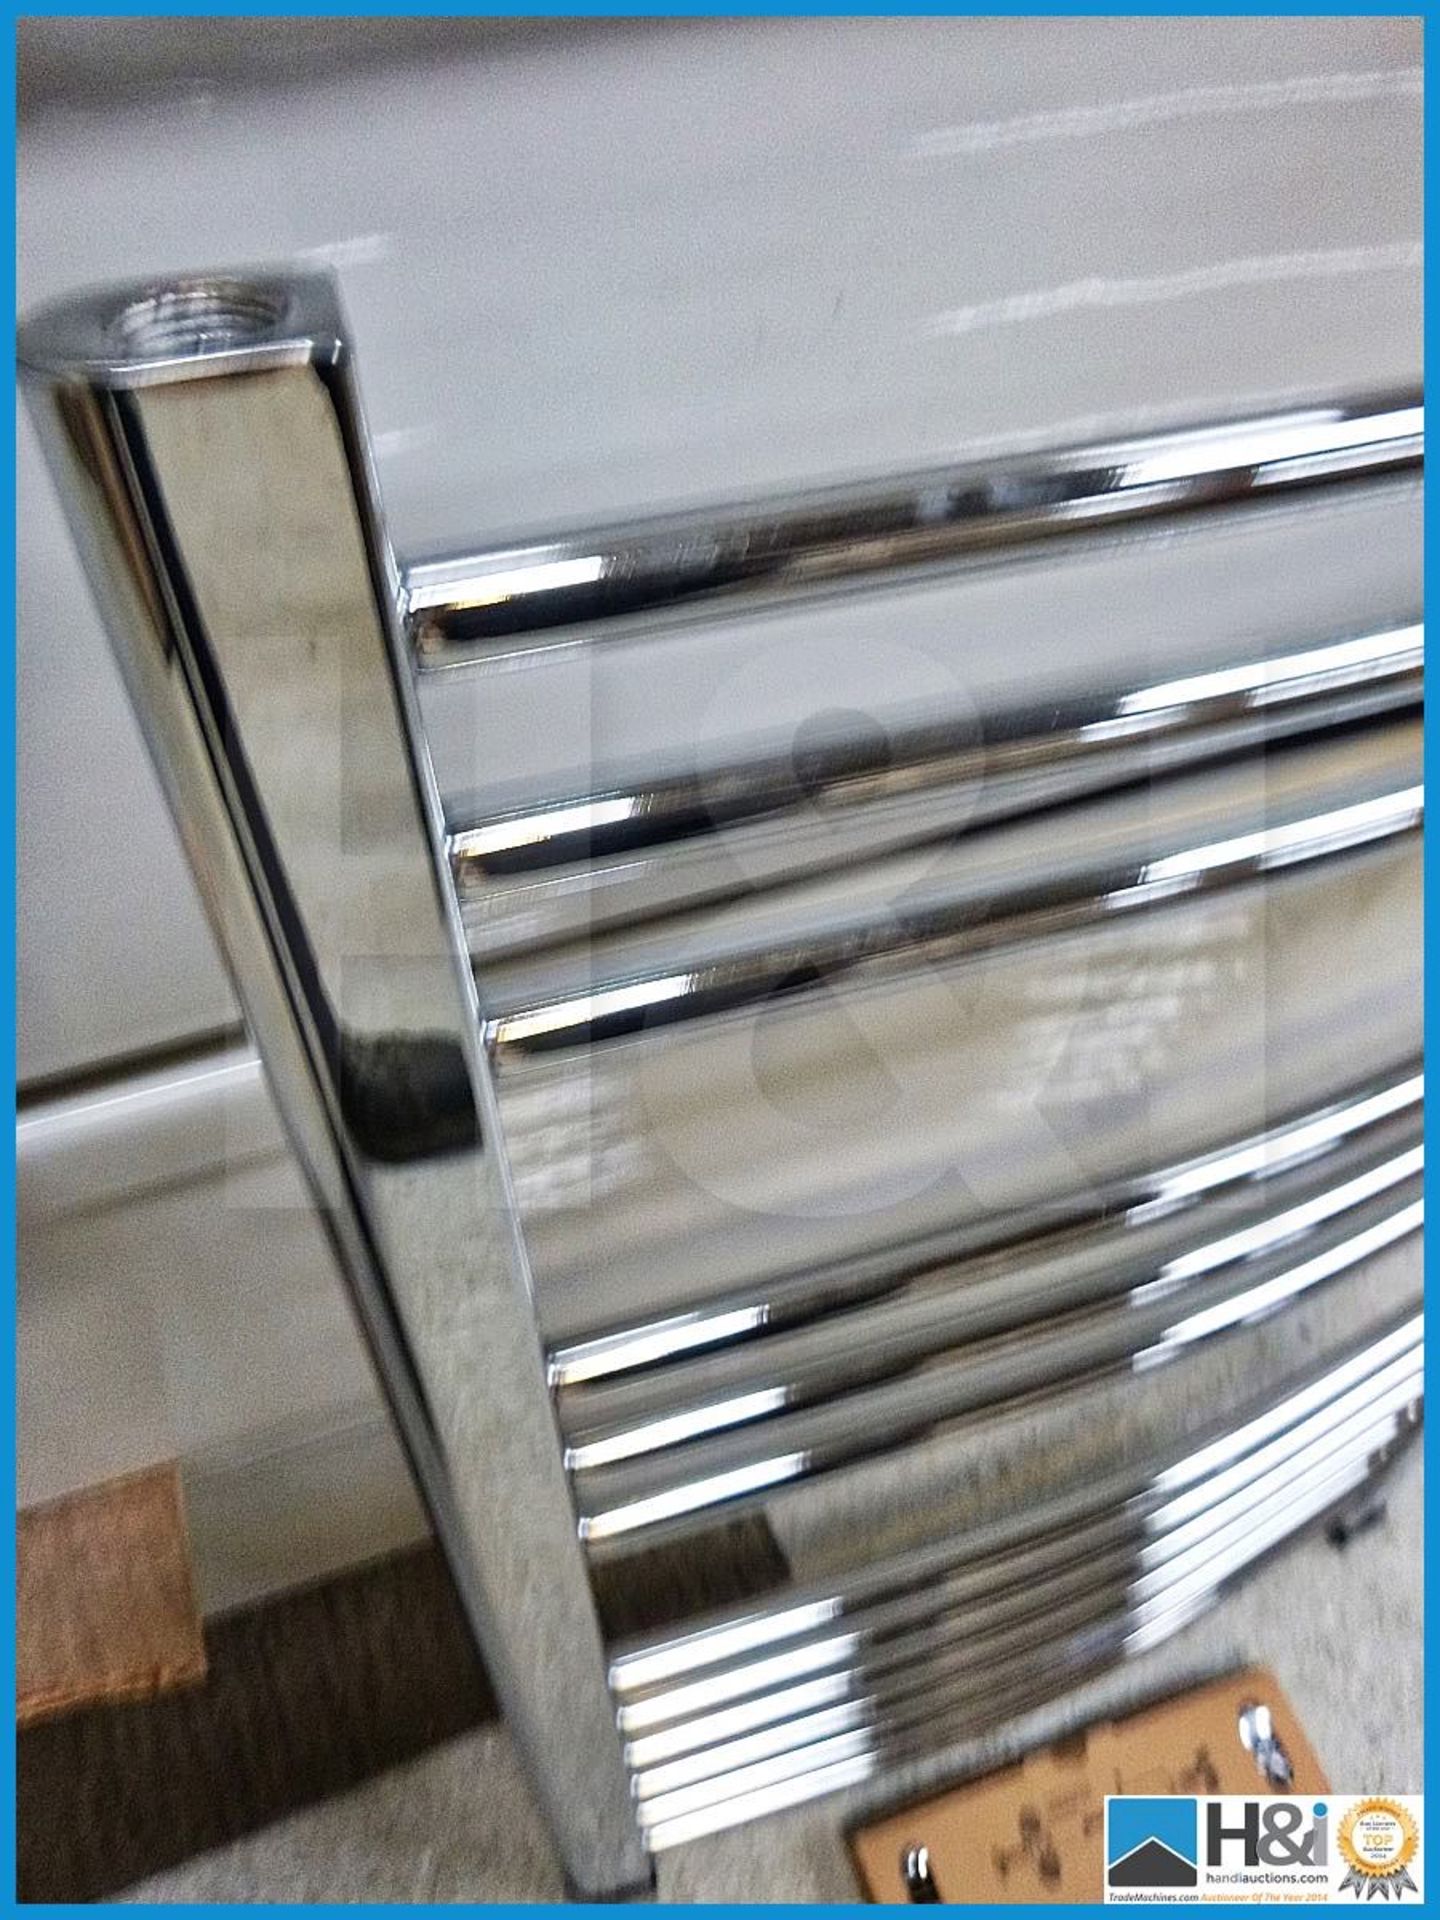 Chrome towel radiator 800mmX500mm Complete with fittings RRP 149 GBP - Image 2 of 4